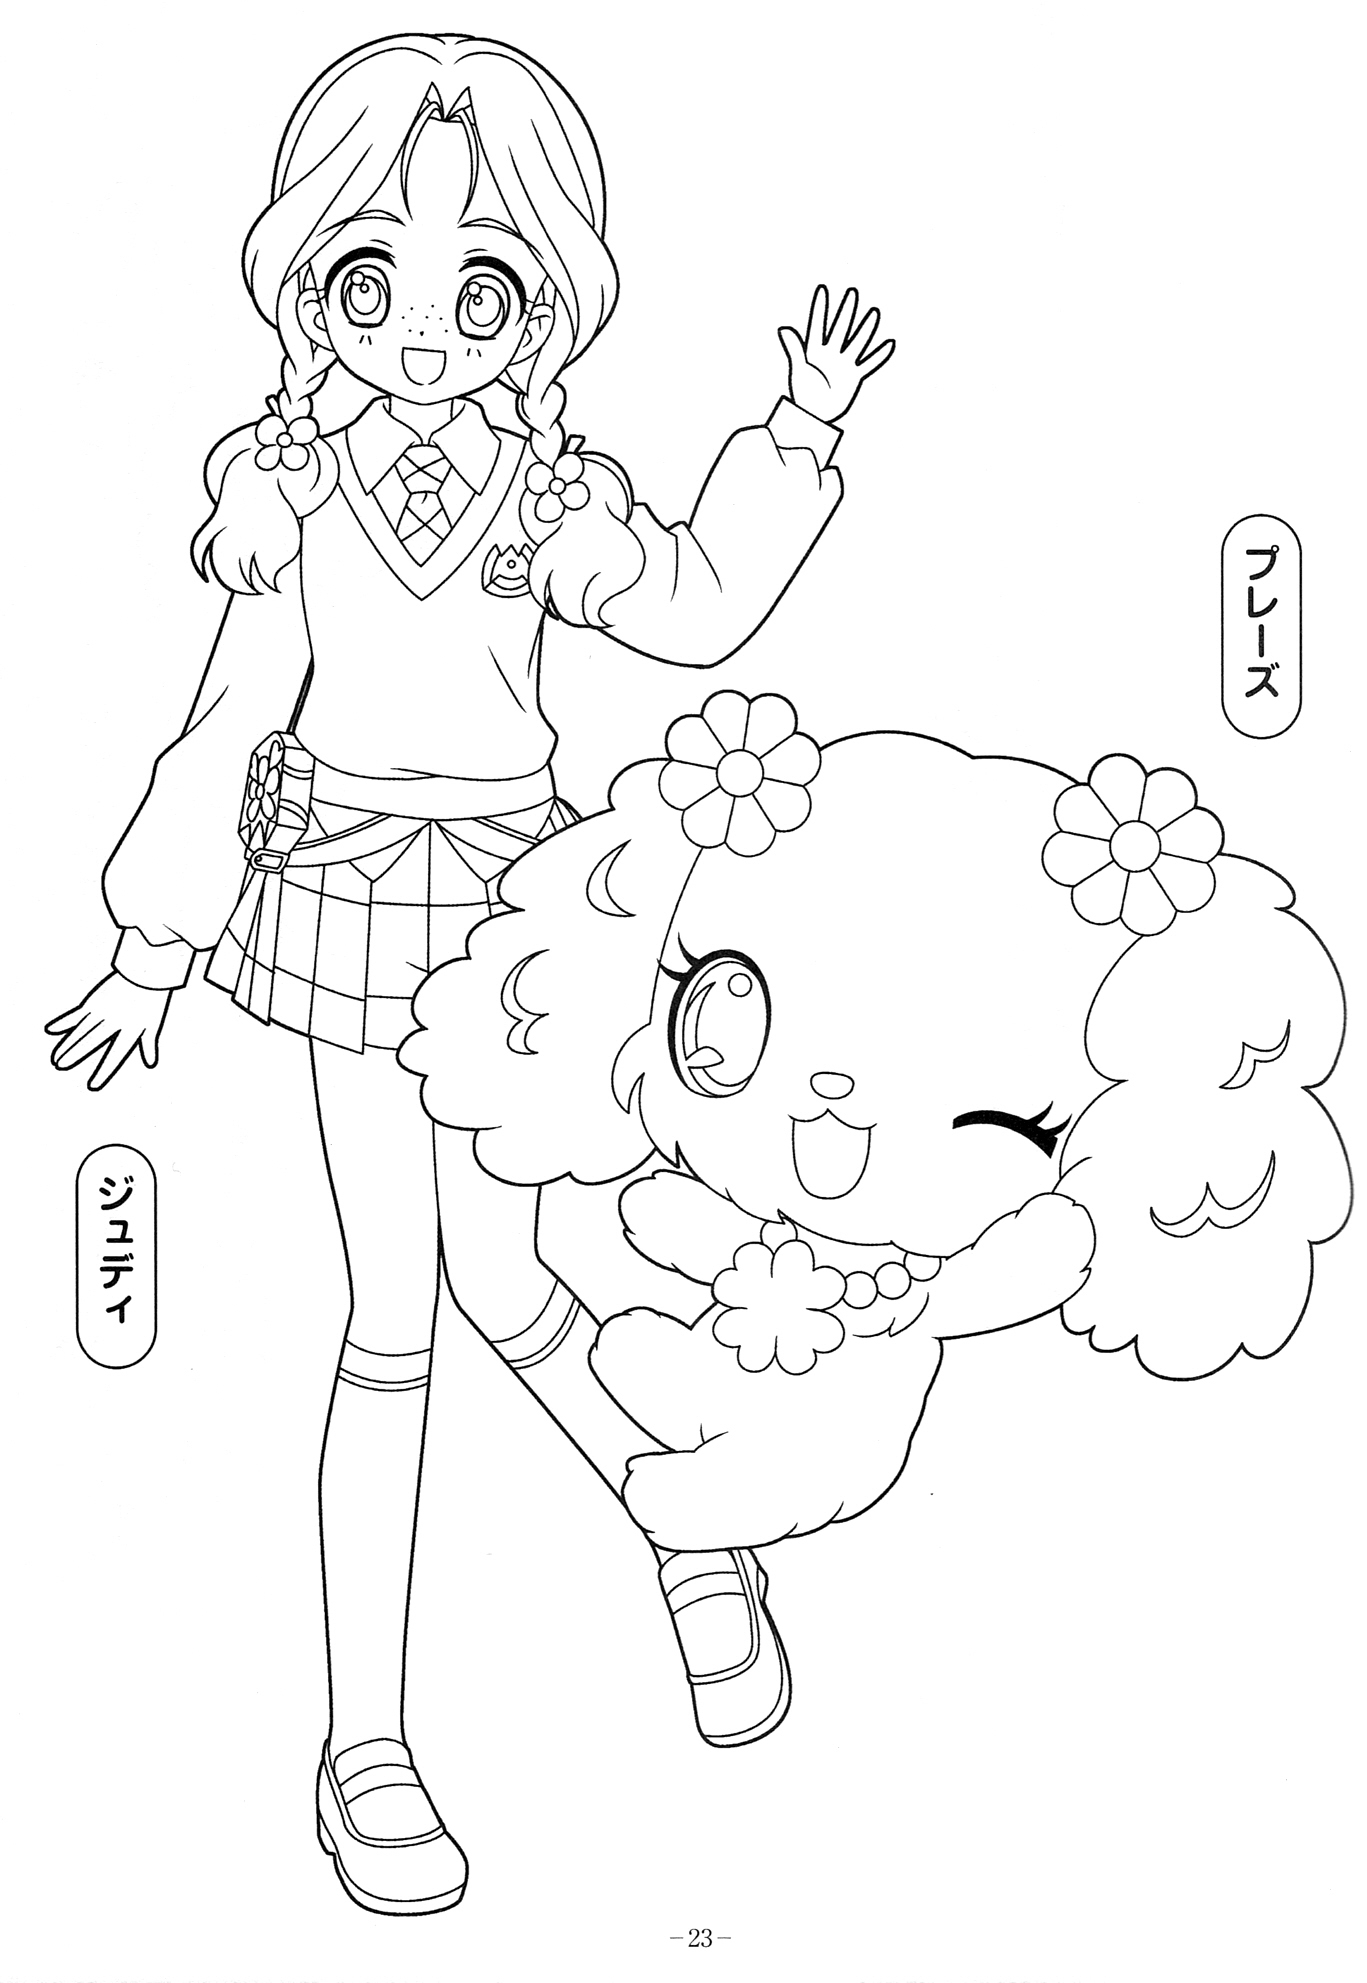 Drawing Jewelpet #37711 (Cartoons) – Printable coloring pages